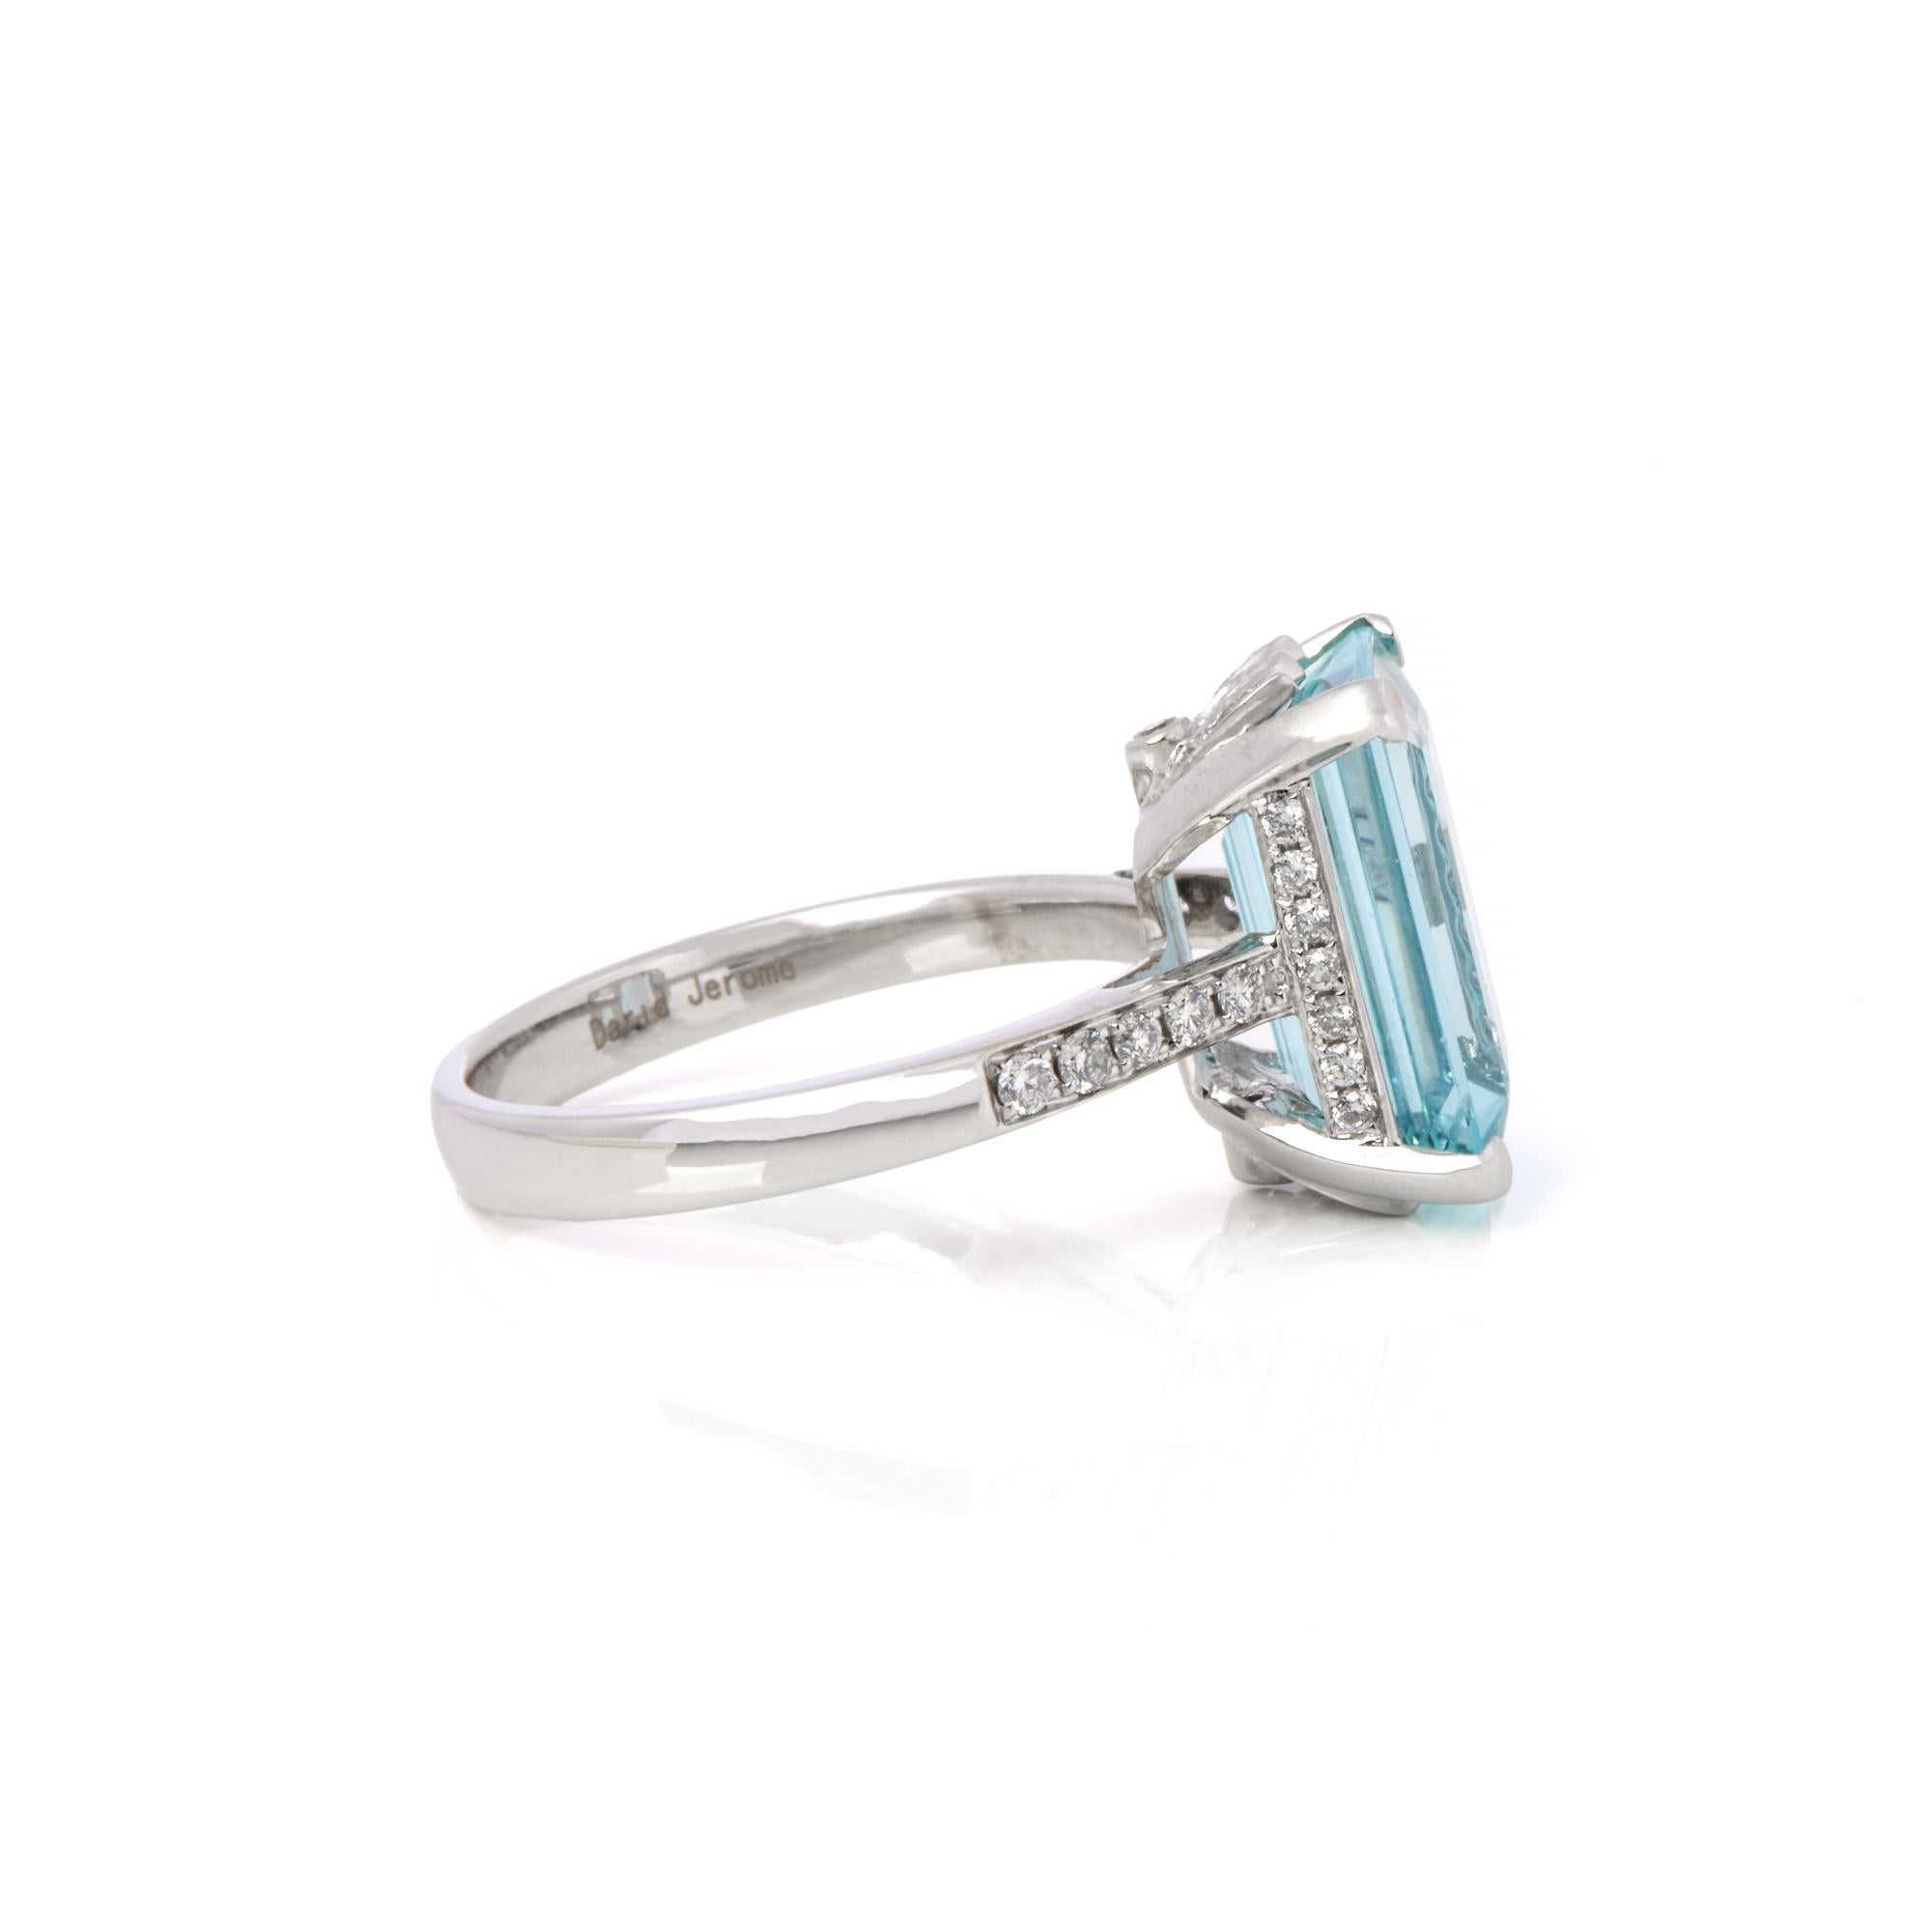 Contemporary David Jerome Certified 5.61ct Emerald Cut Aquamarine and Diamond Ring For Sale